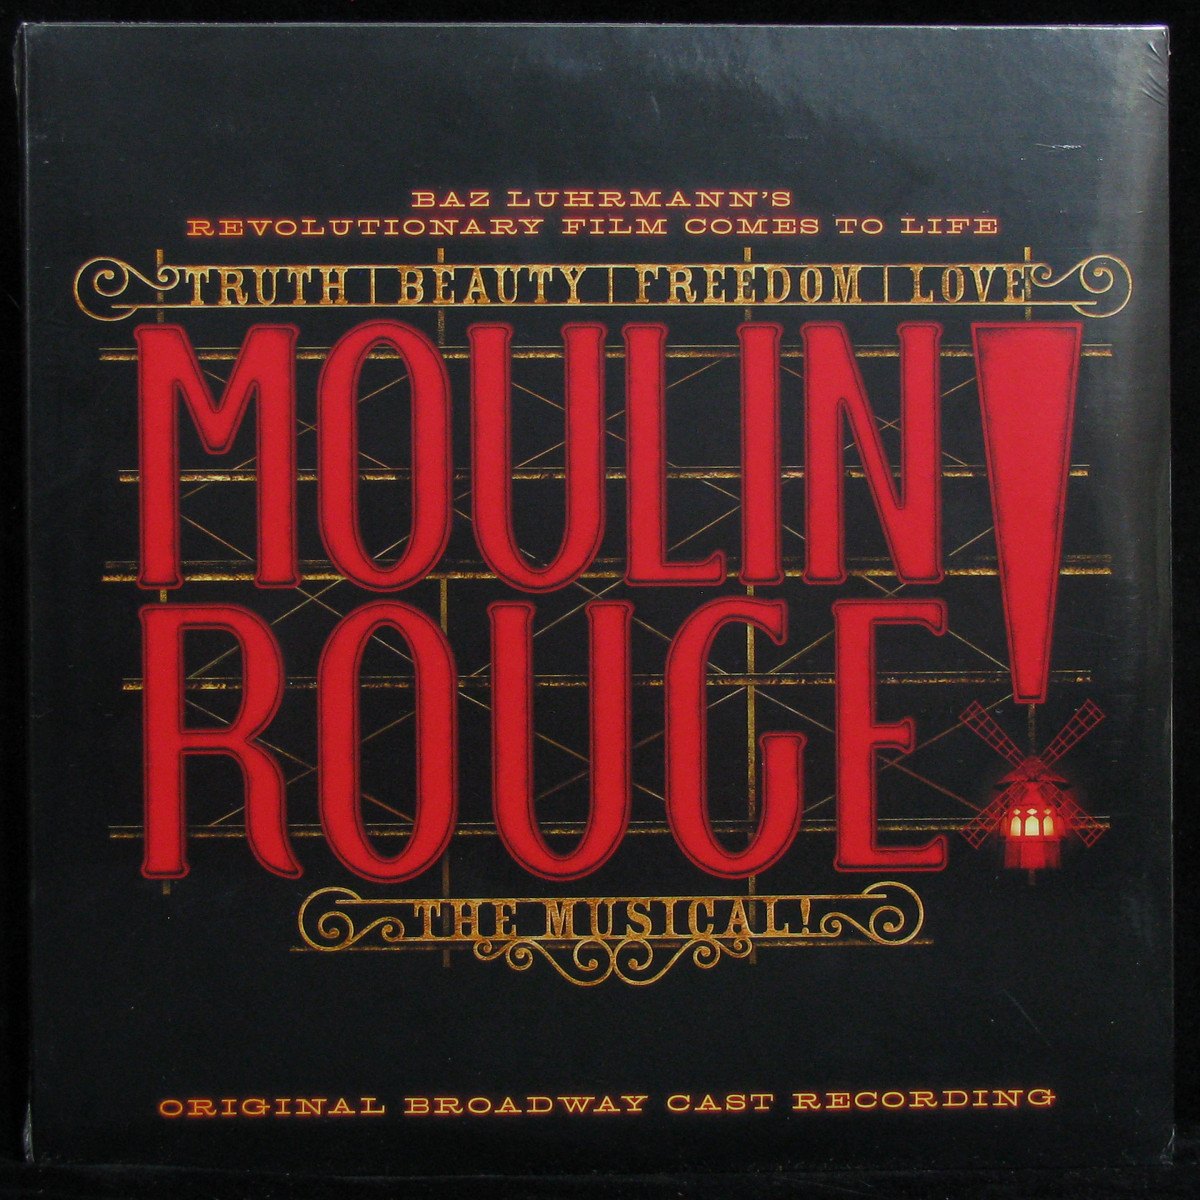 Moulin Rouge! The Musical (Original Broadway Cast Recording)